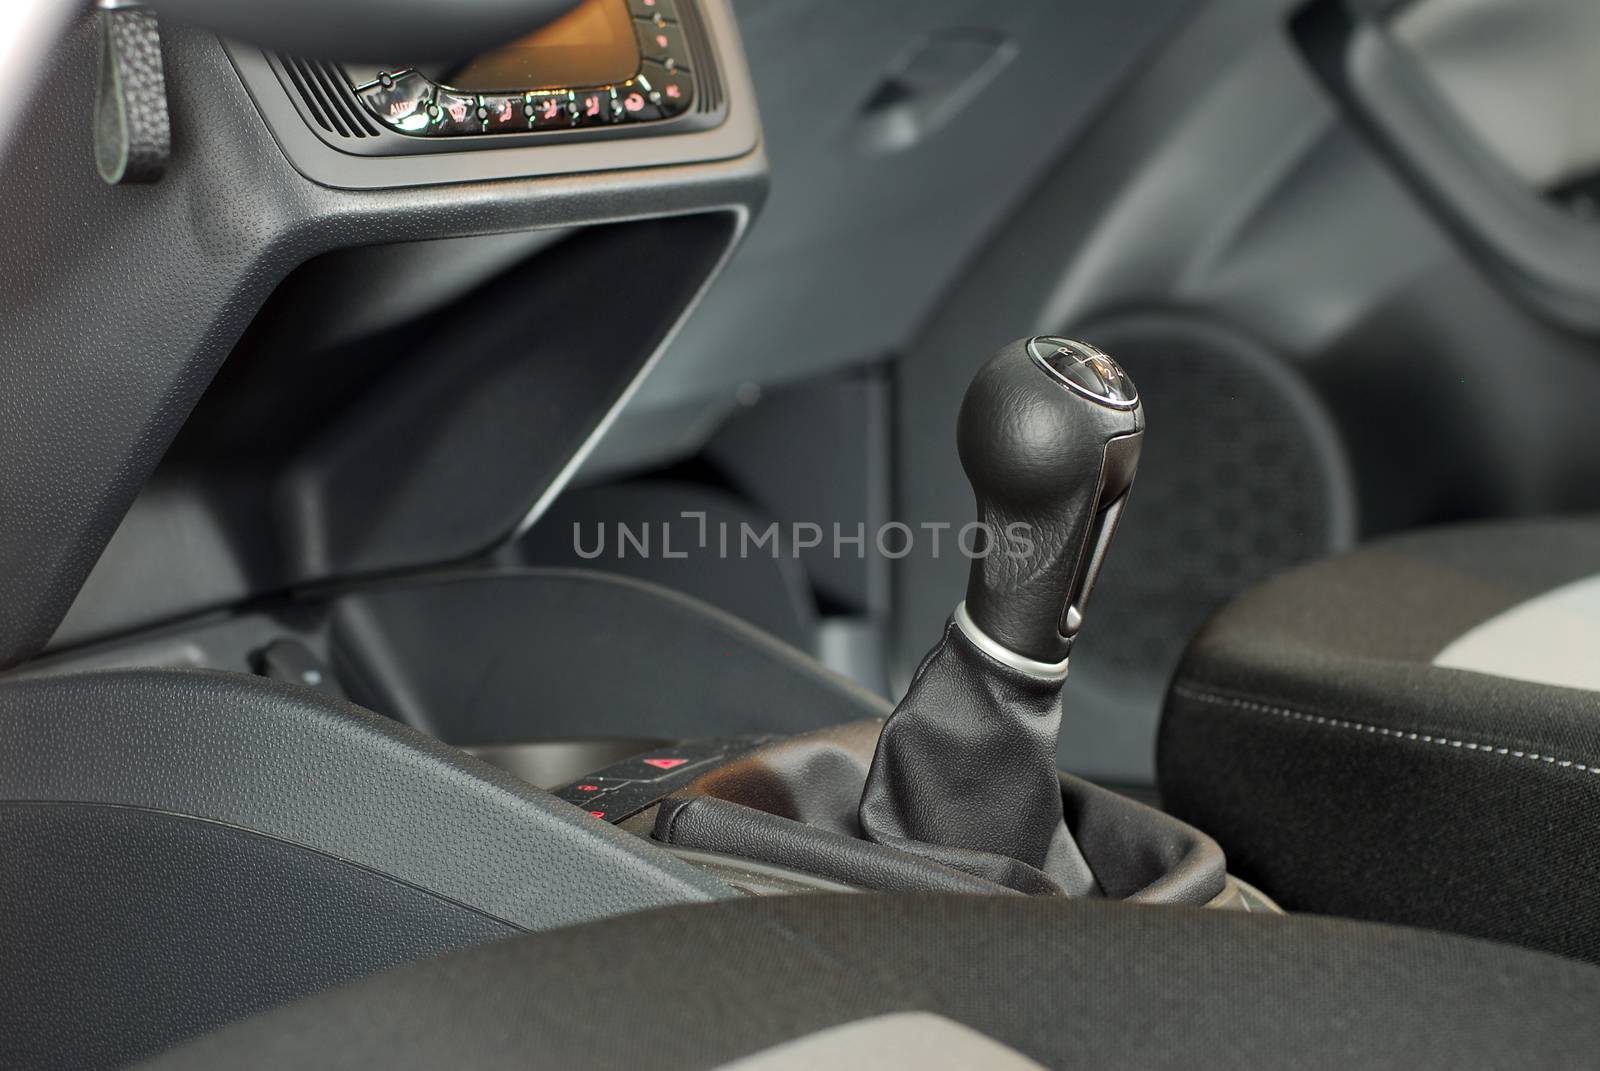 maual shift lever in the passenger car by aselsa